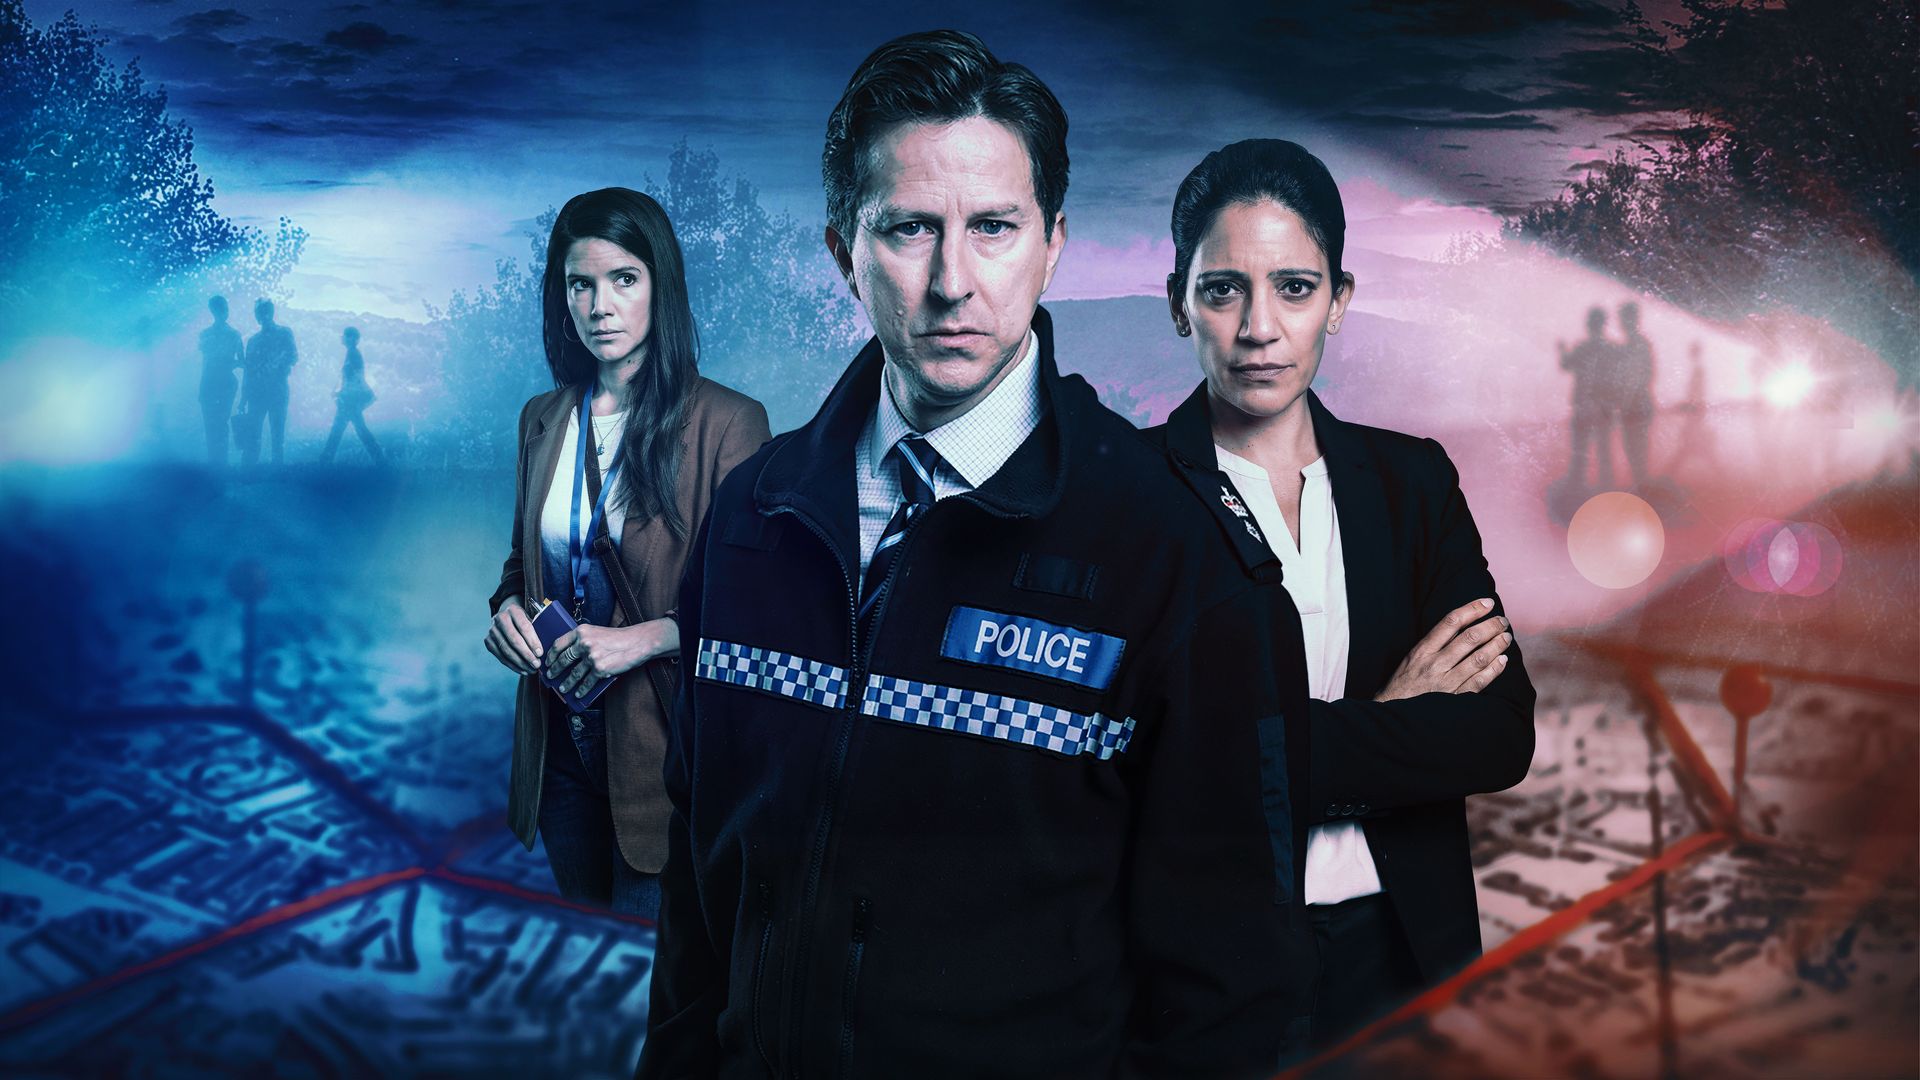 Lee Ingleby as Neil Adams, Vineeta RISHI as Nisha Roberts and Sonya CASSIDY as Diane Barnwell on the show's official poster